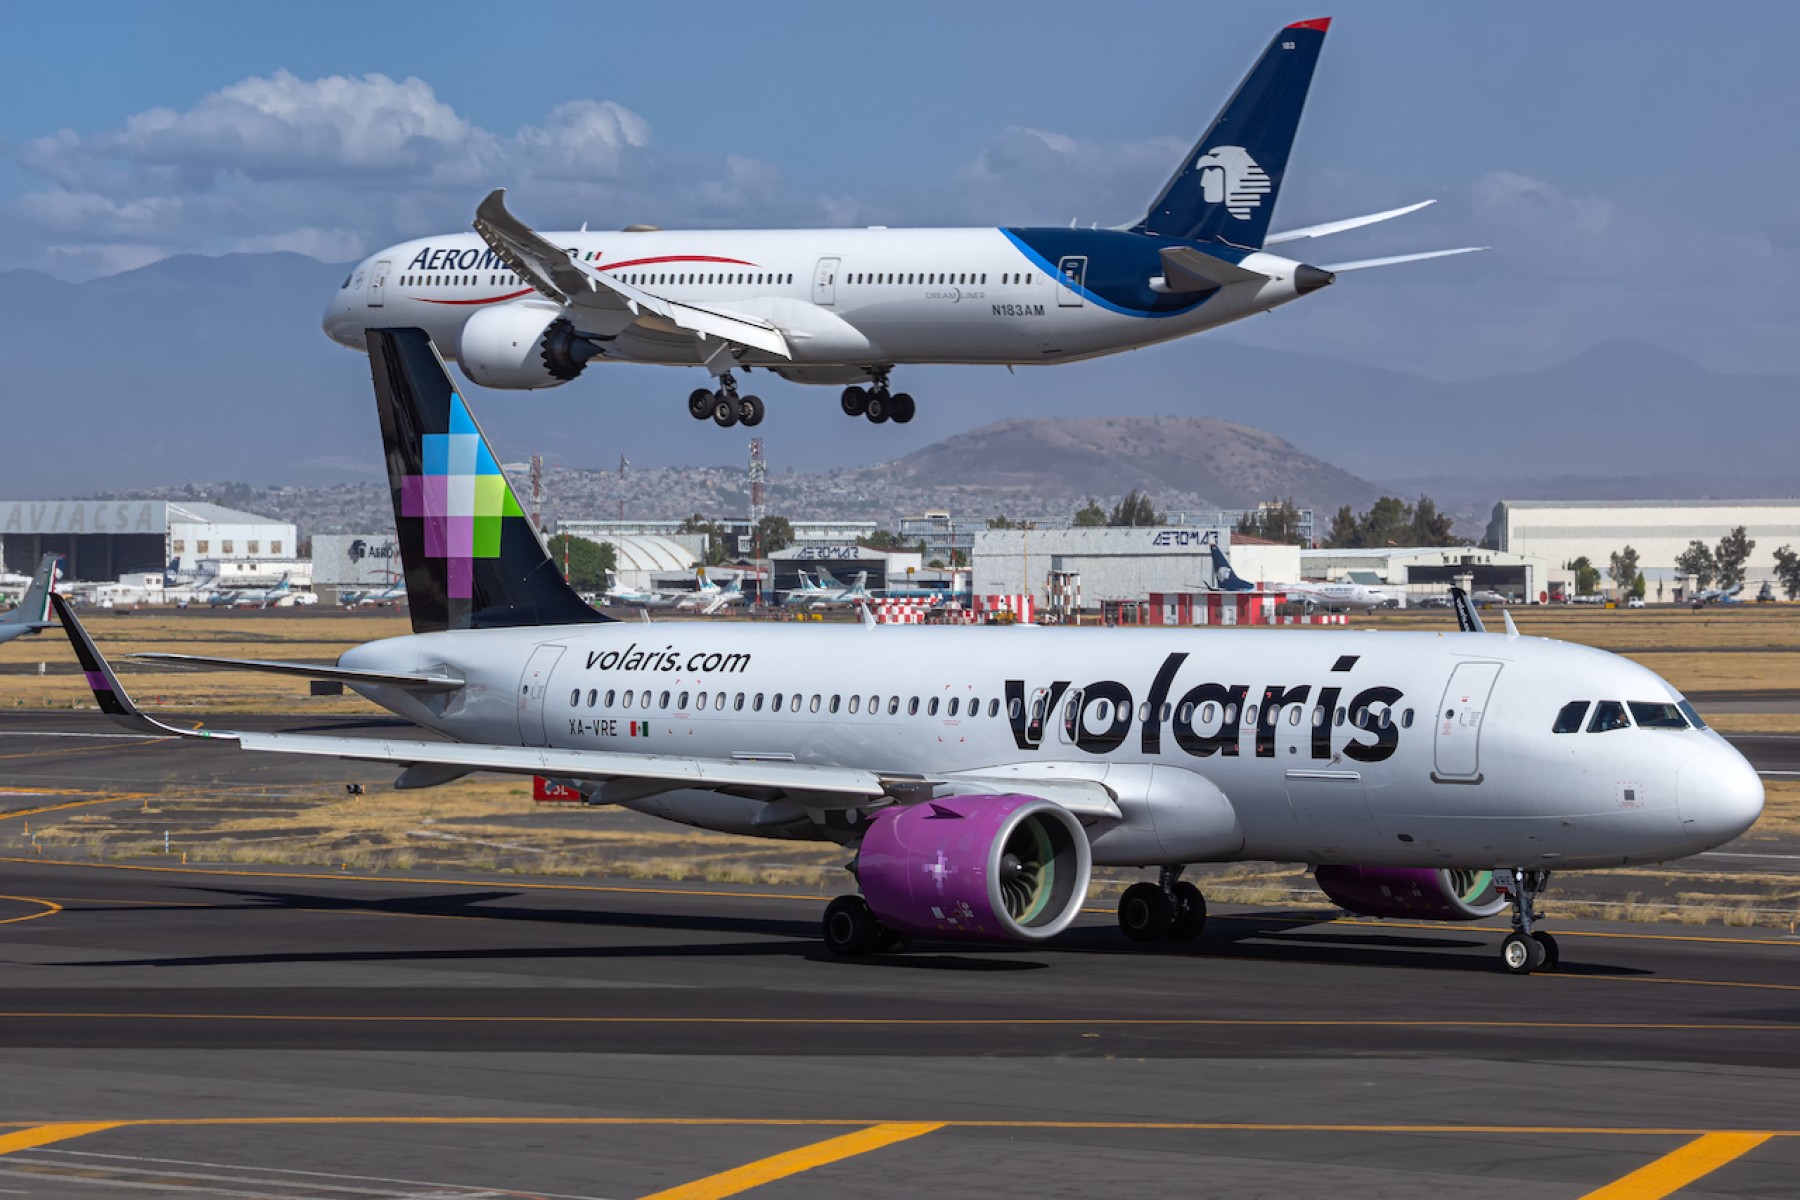 Half of Mexico’s air fleet operated by low-cost carriers